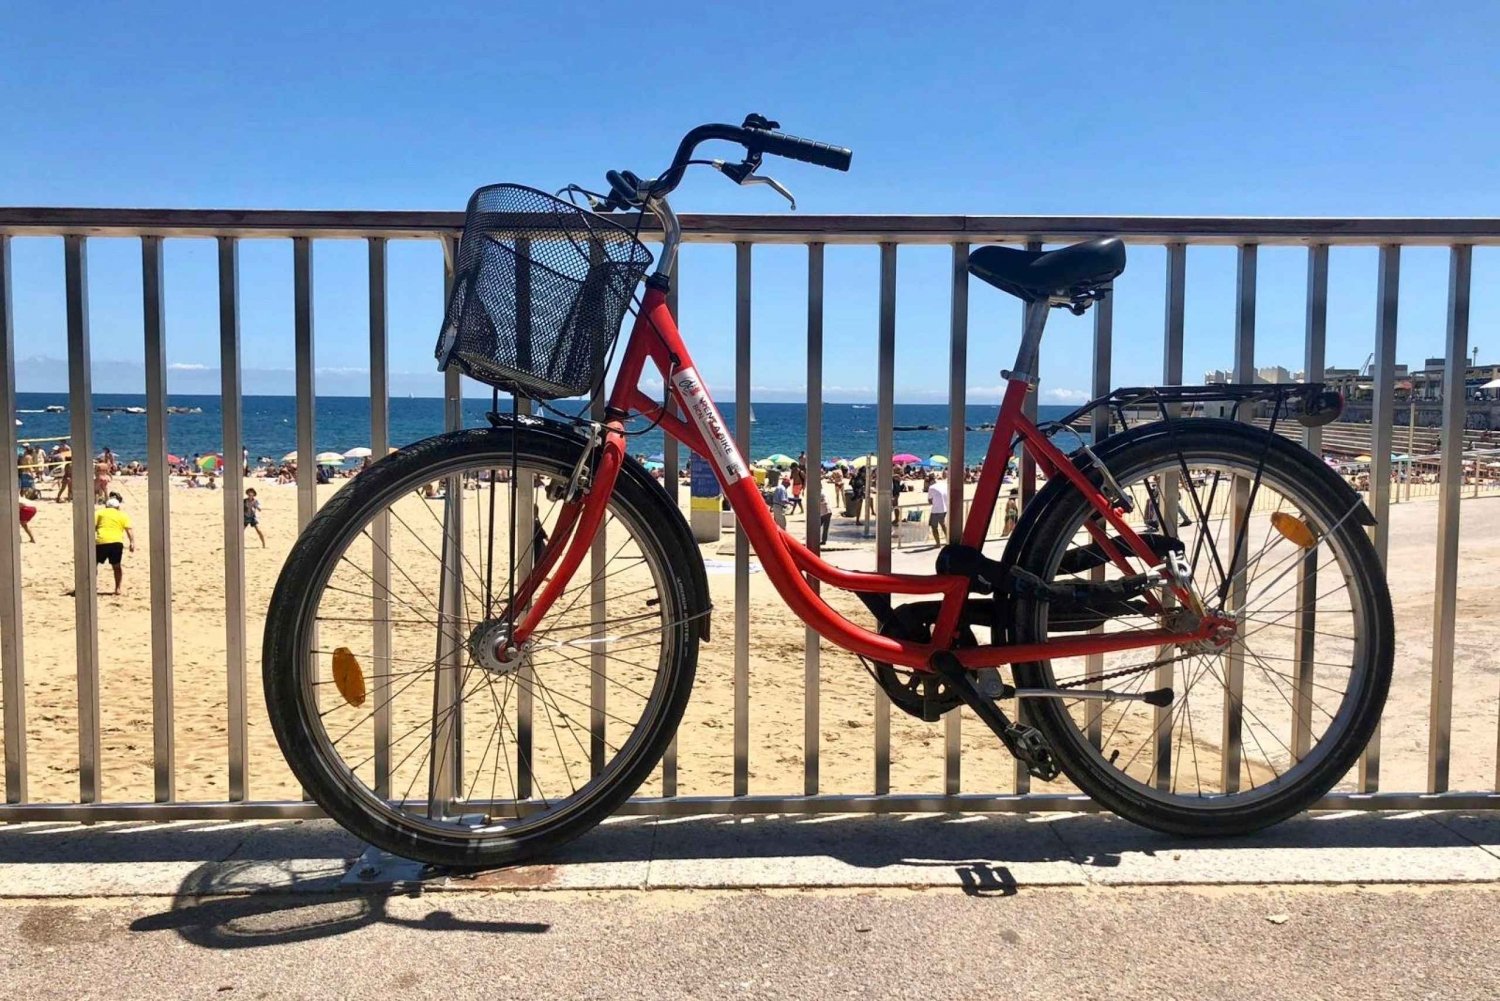 Barcelona: Discover the city by yourself on the bike